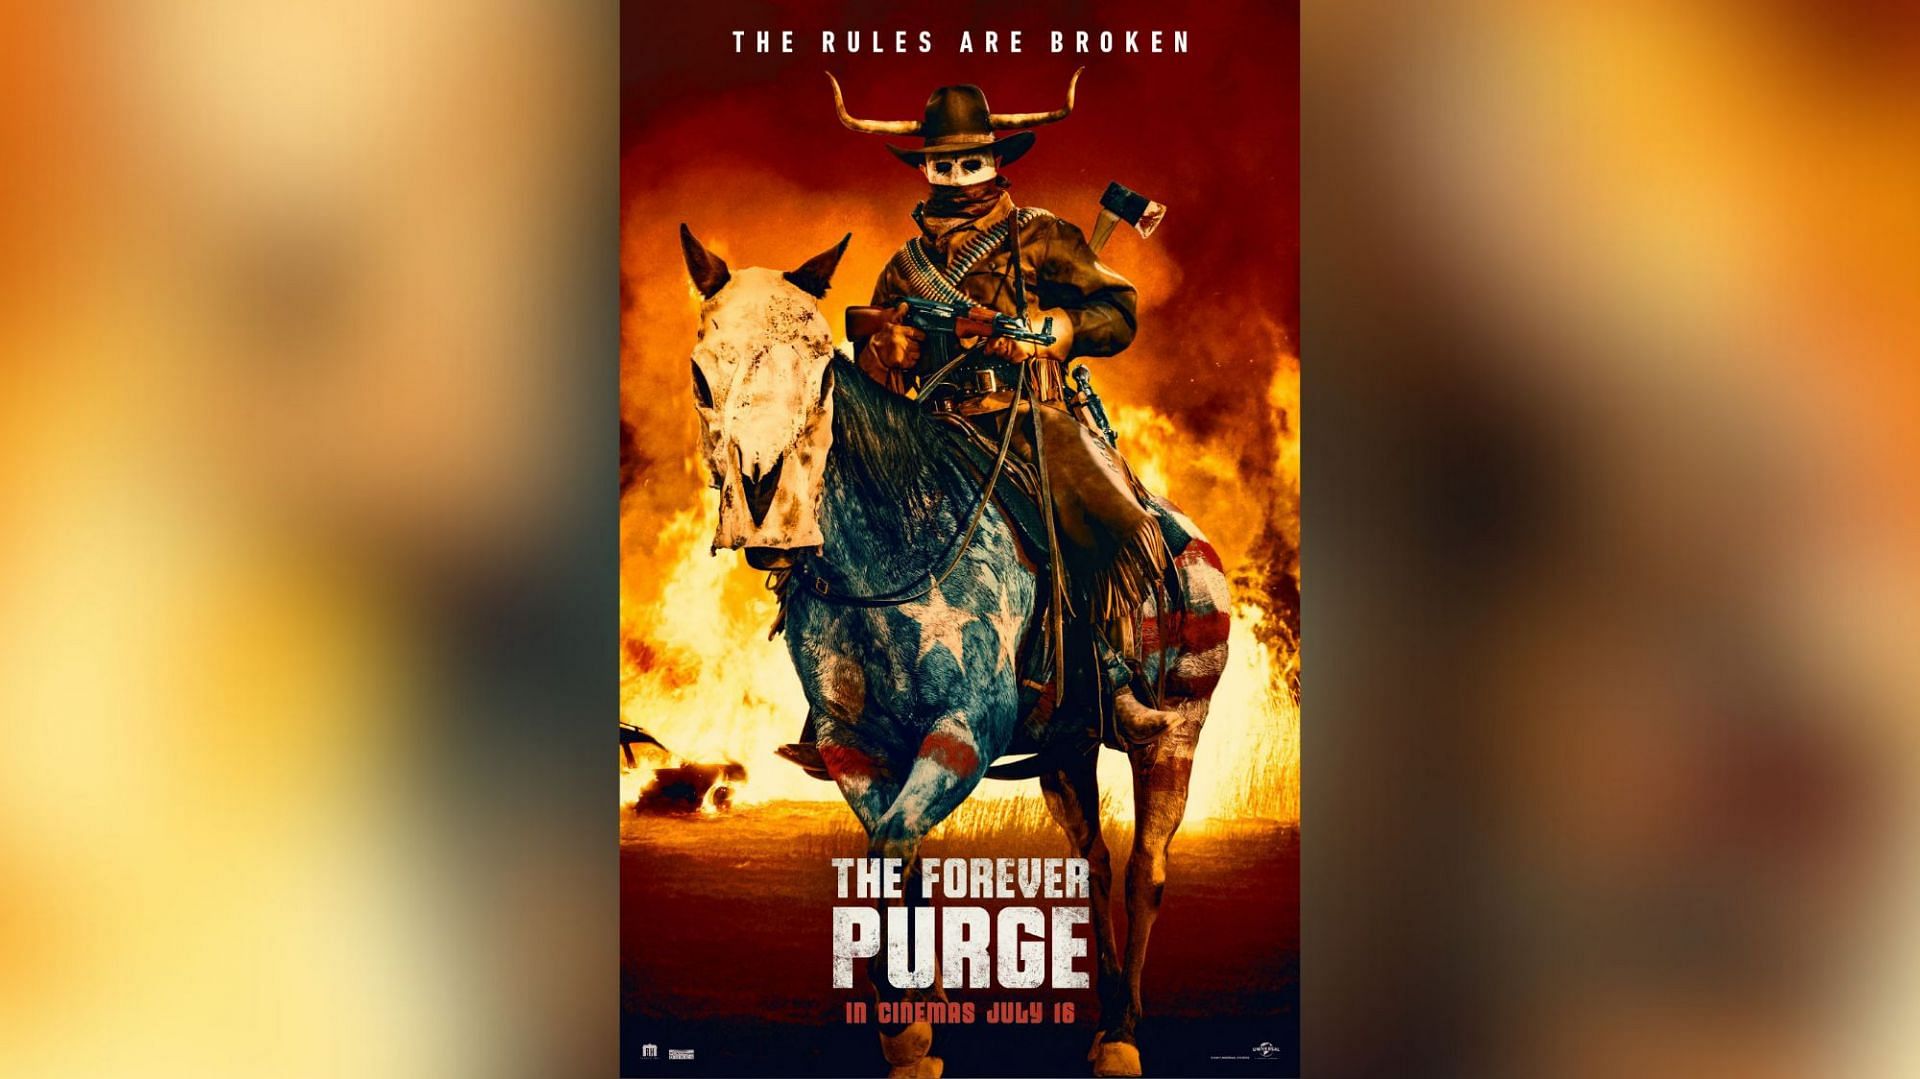 The Forever Purge (Image via Universal)